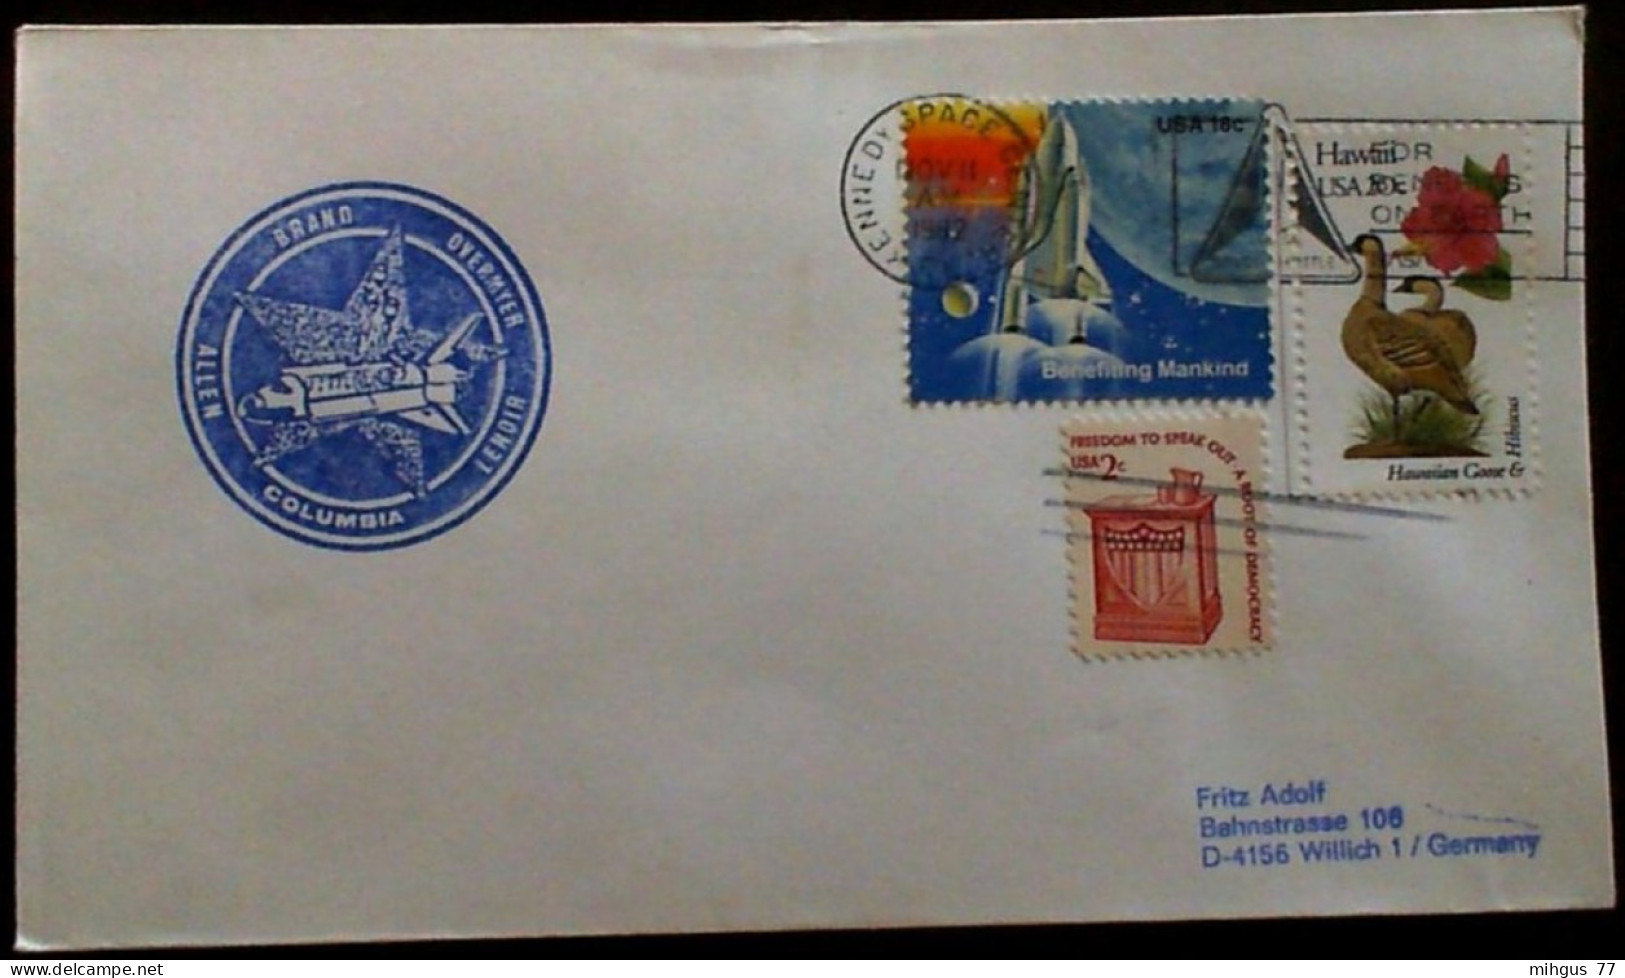 USA 1982 STS-5  Kennedy Space Centre - United States